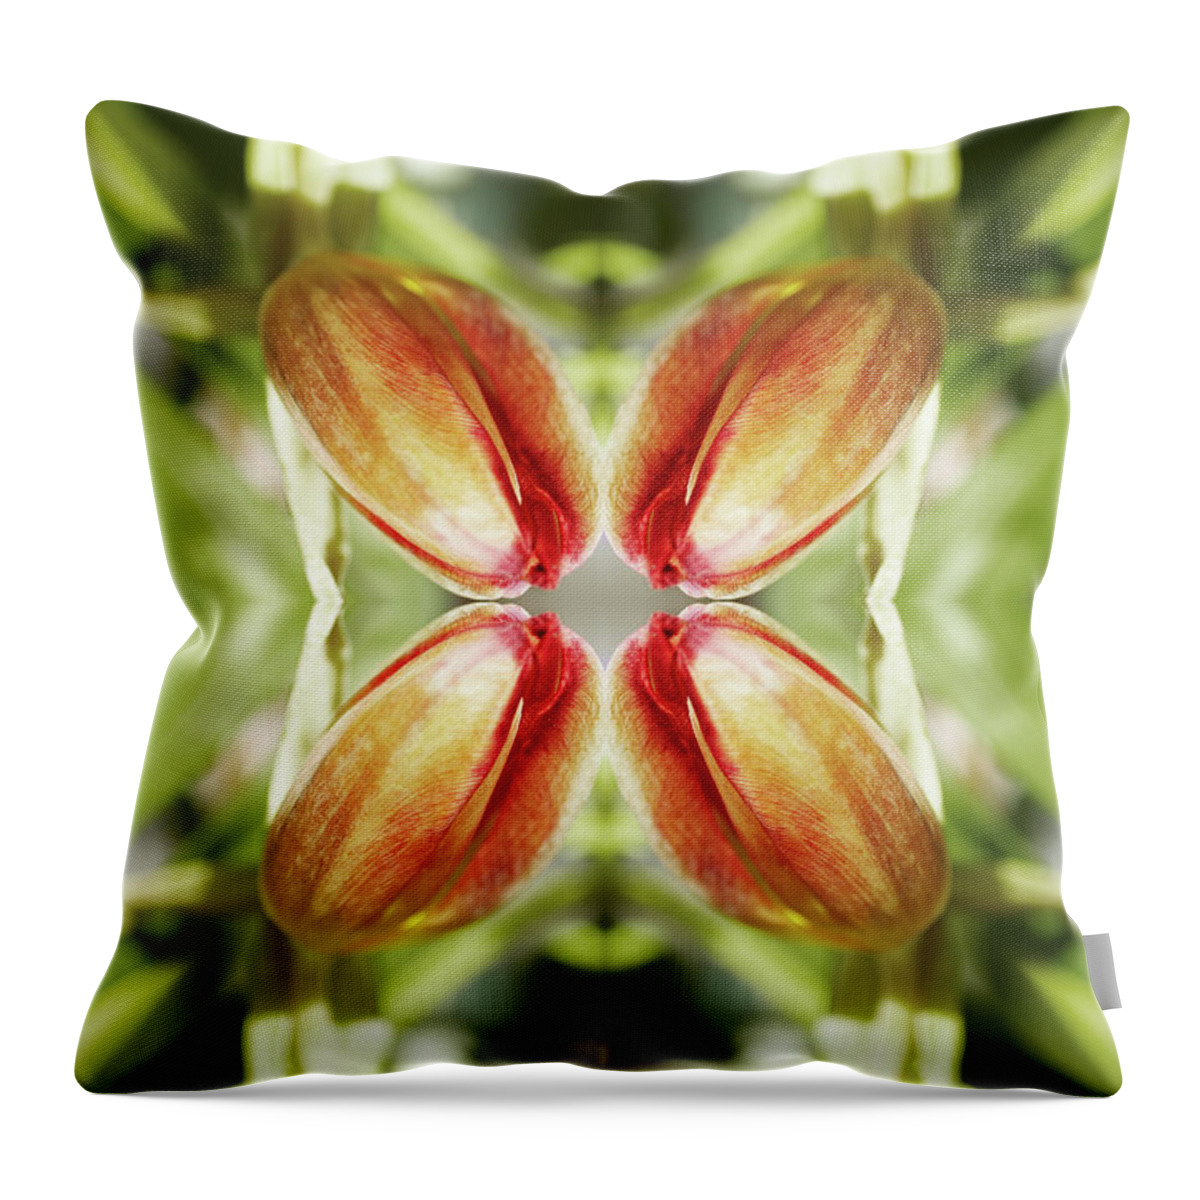 Tranquility Throw Pillow featuring the photograph Red Tulip #1 by Silvia Otte